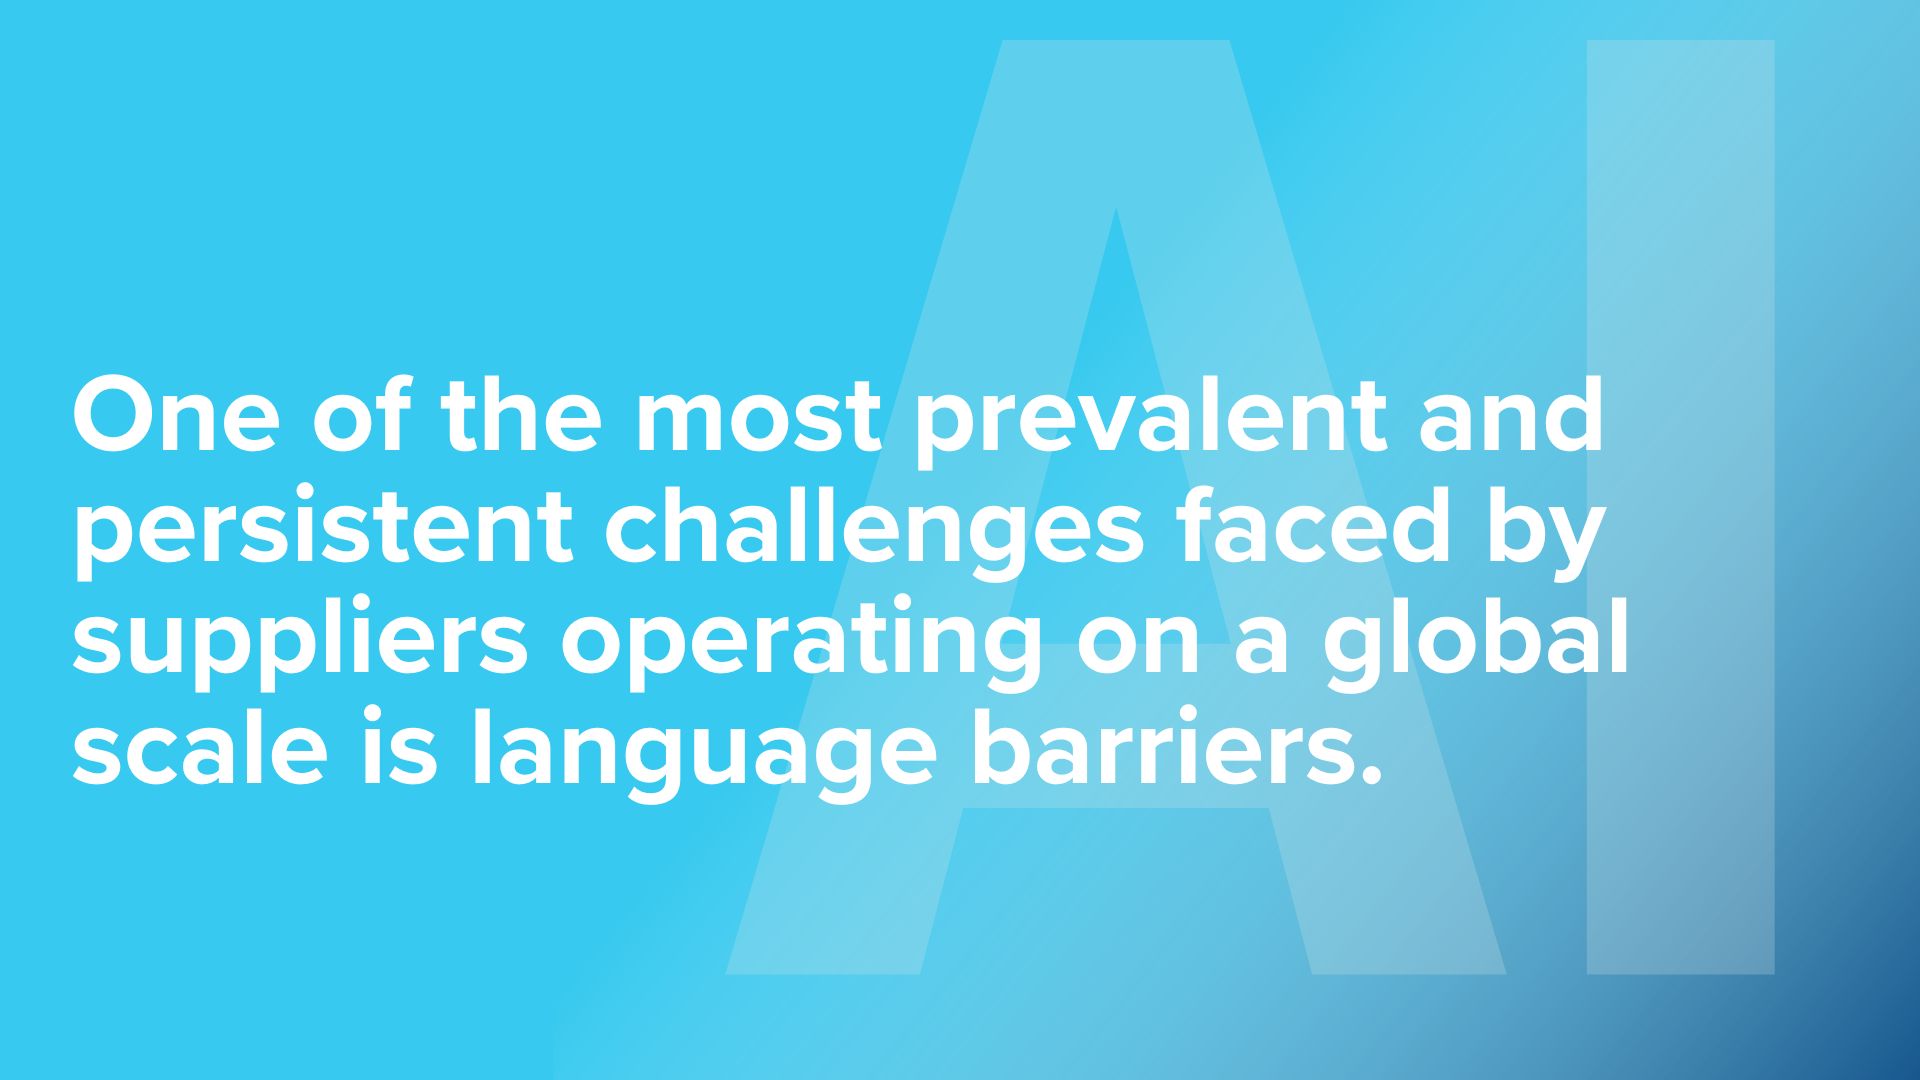 Language barriers in supply chain operations